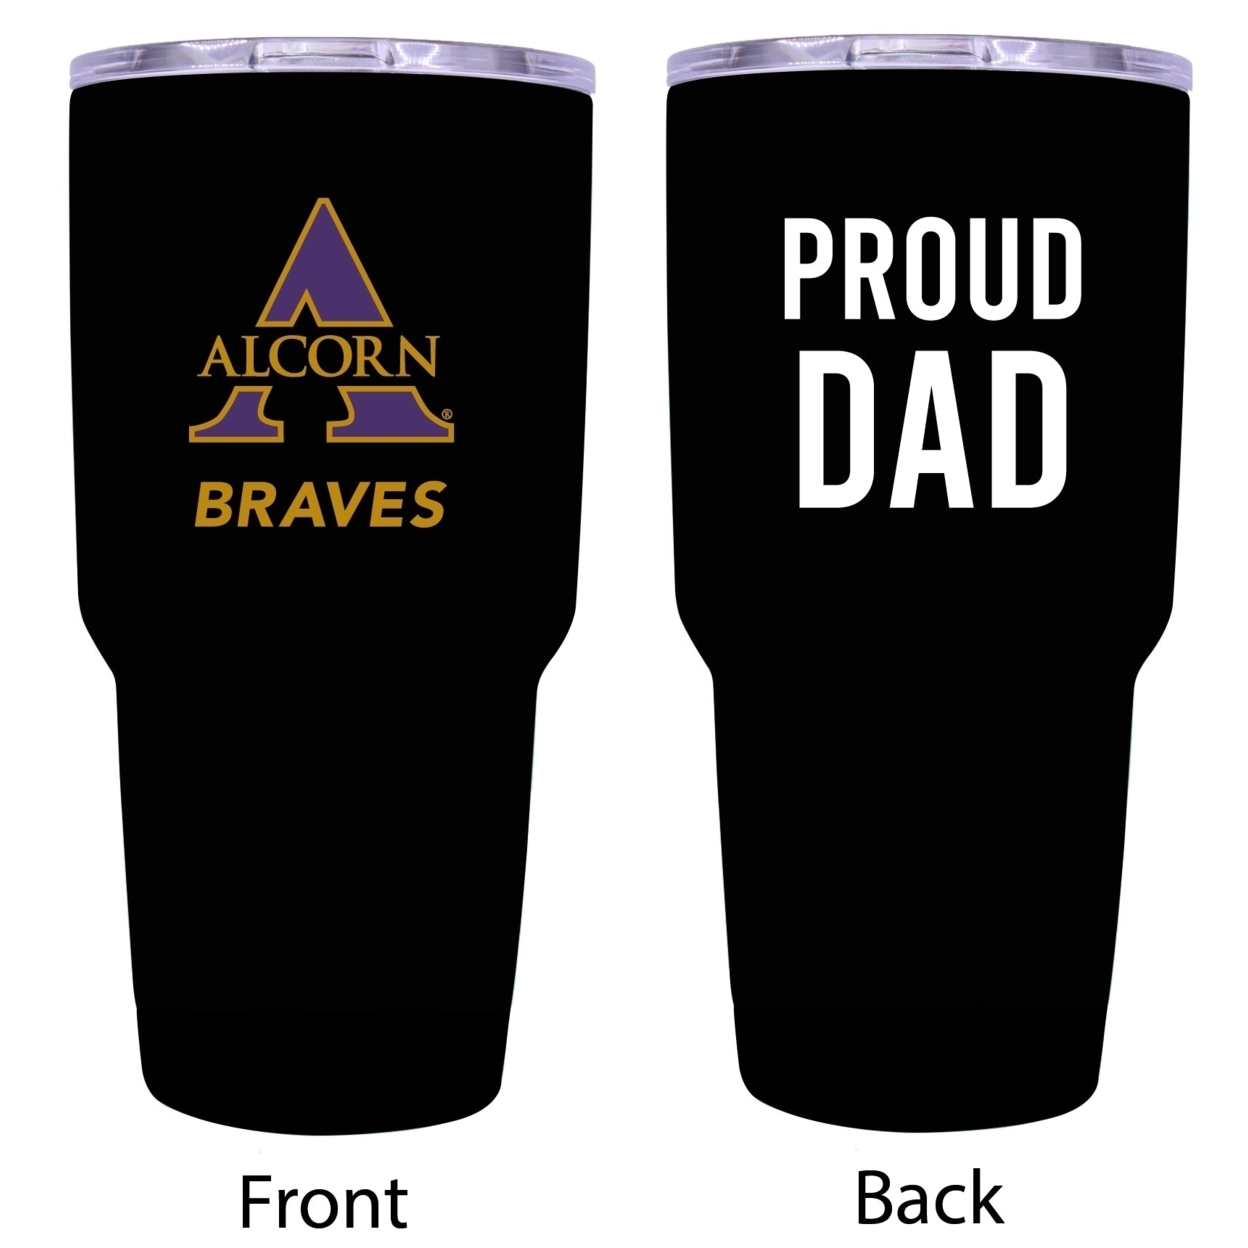 Alcorn State Braves Proud Dad 24 Oz Insulated Stainless Steel Tumblers Choose Your Color.